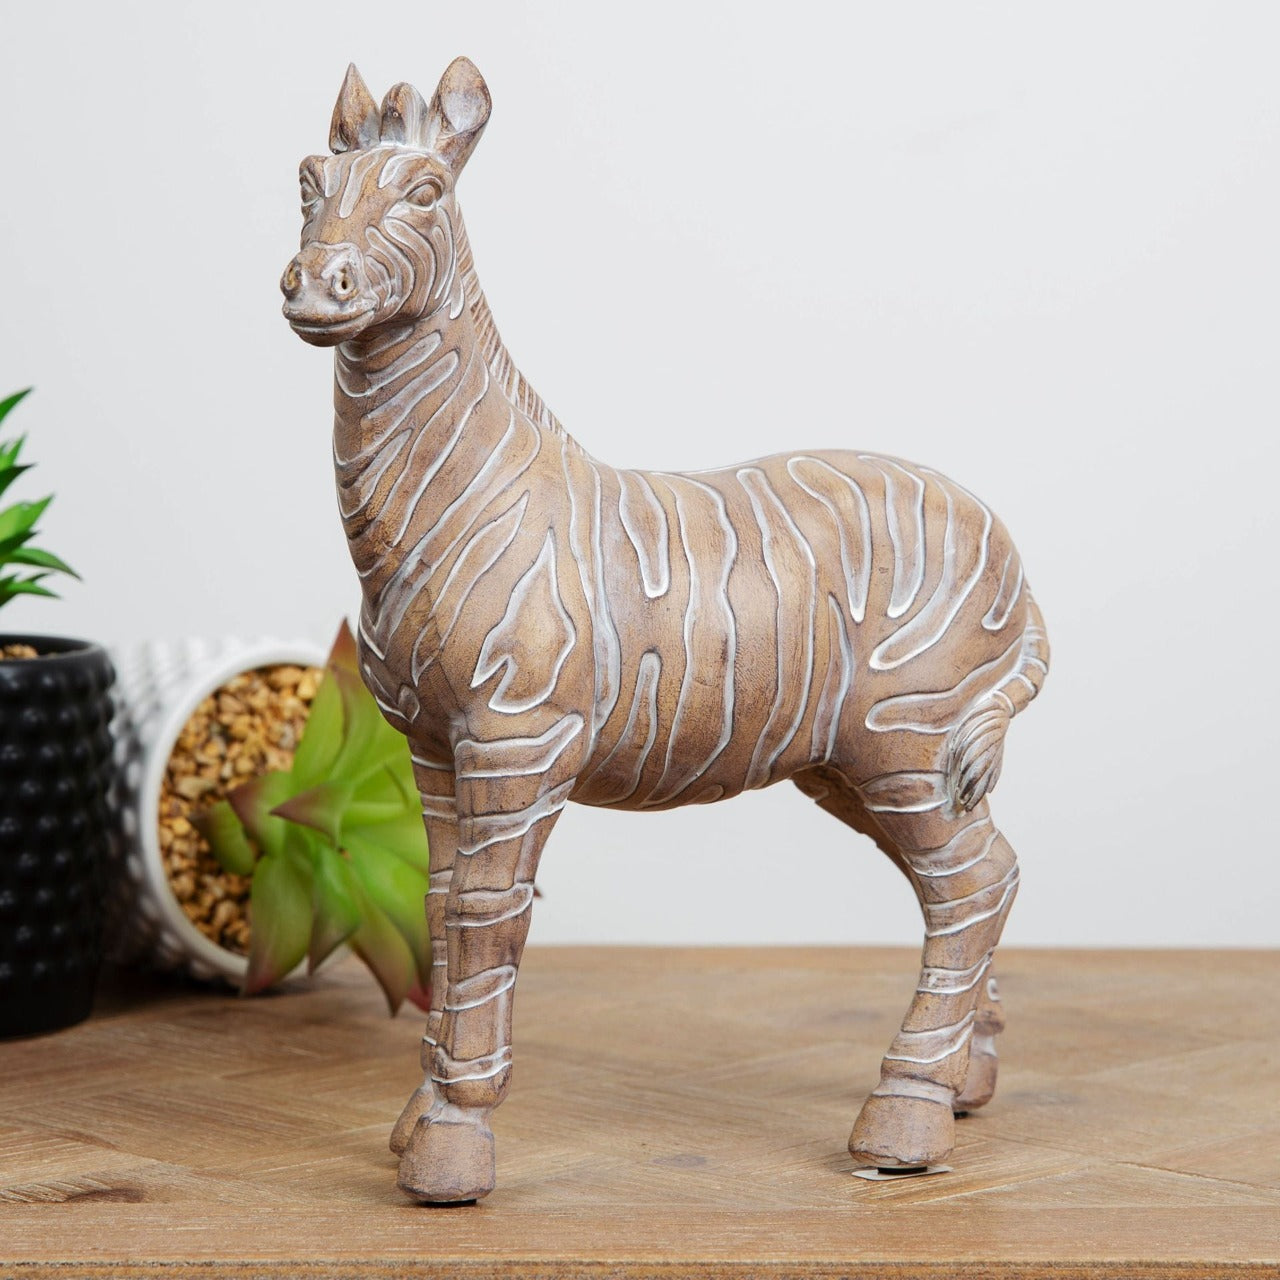 Embossed Zebra Figurine 23cm  Bring some exotic vibes to your home with this carved sandstone effect resin zebra ornament. From the Global Artisan collection by HESTIA® - bring a touch of the exotic to your home.